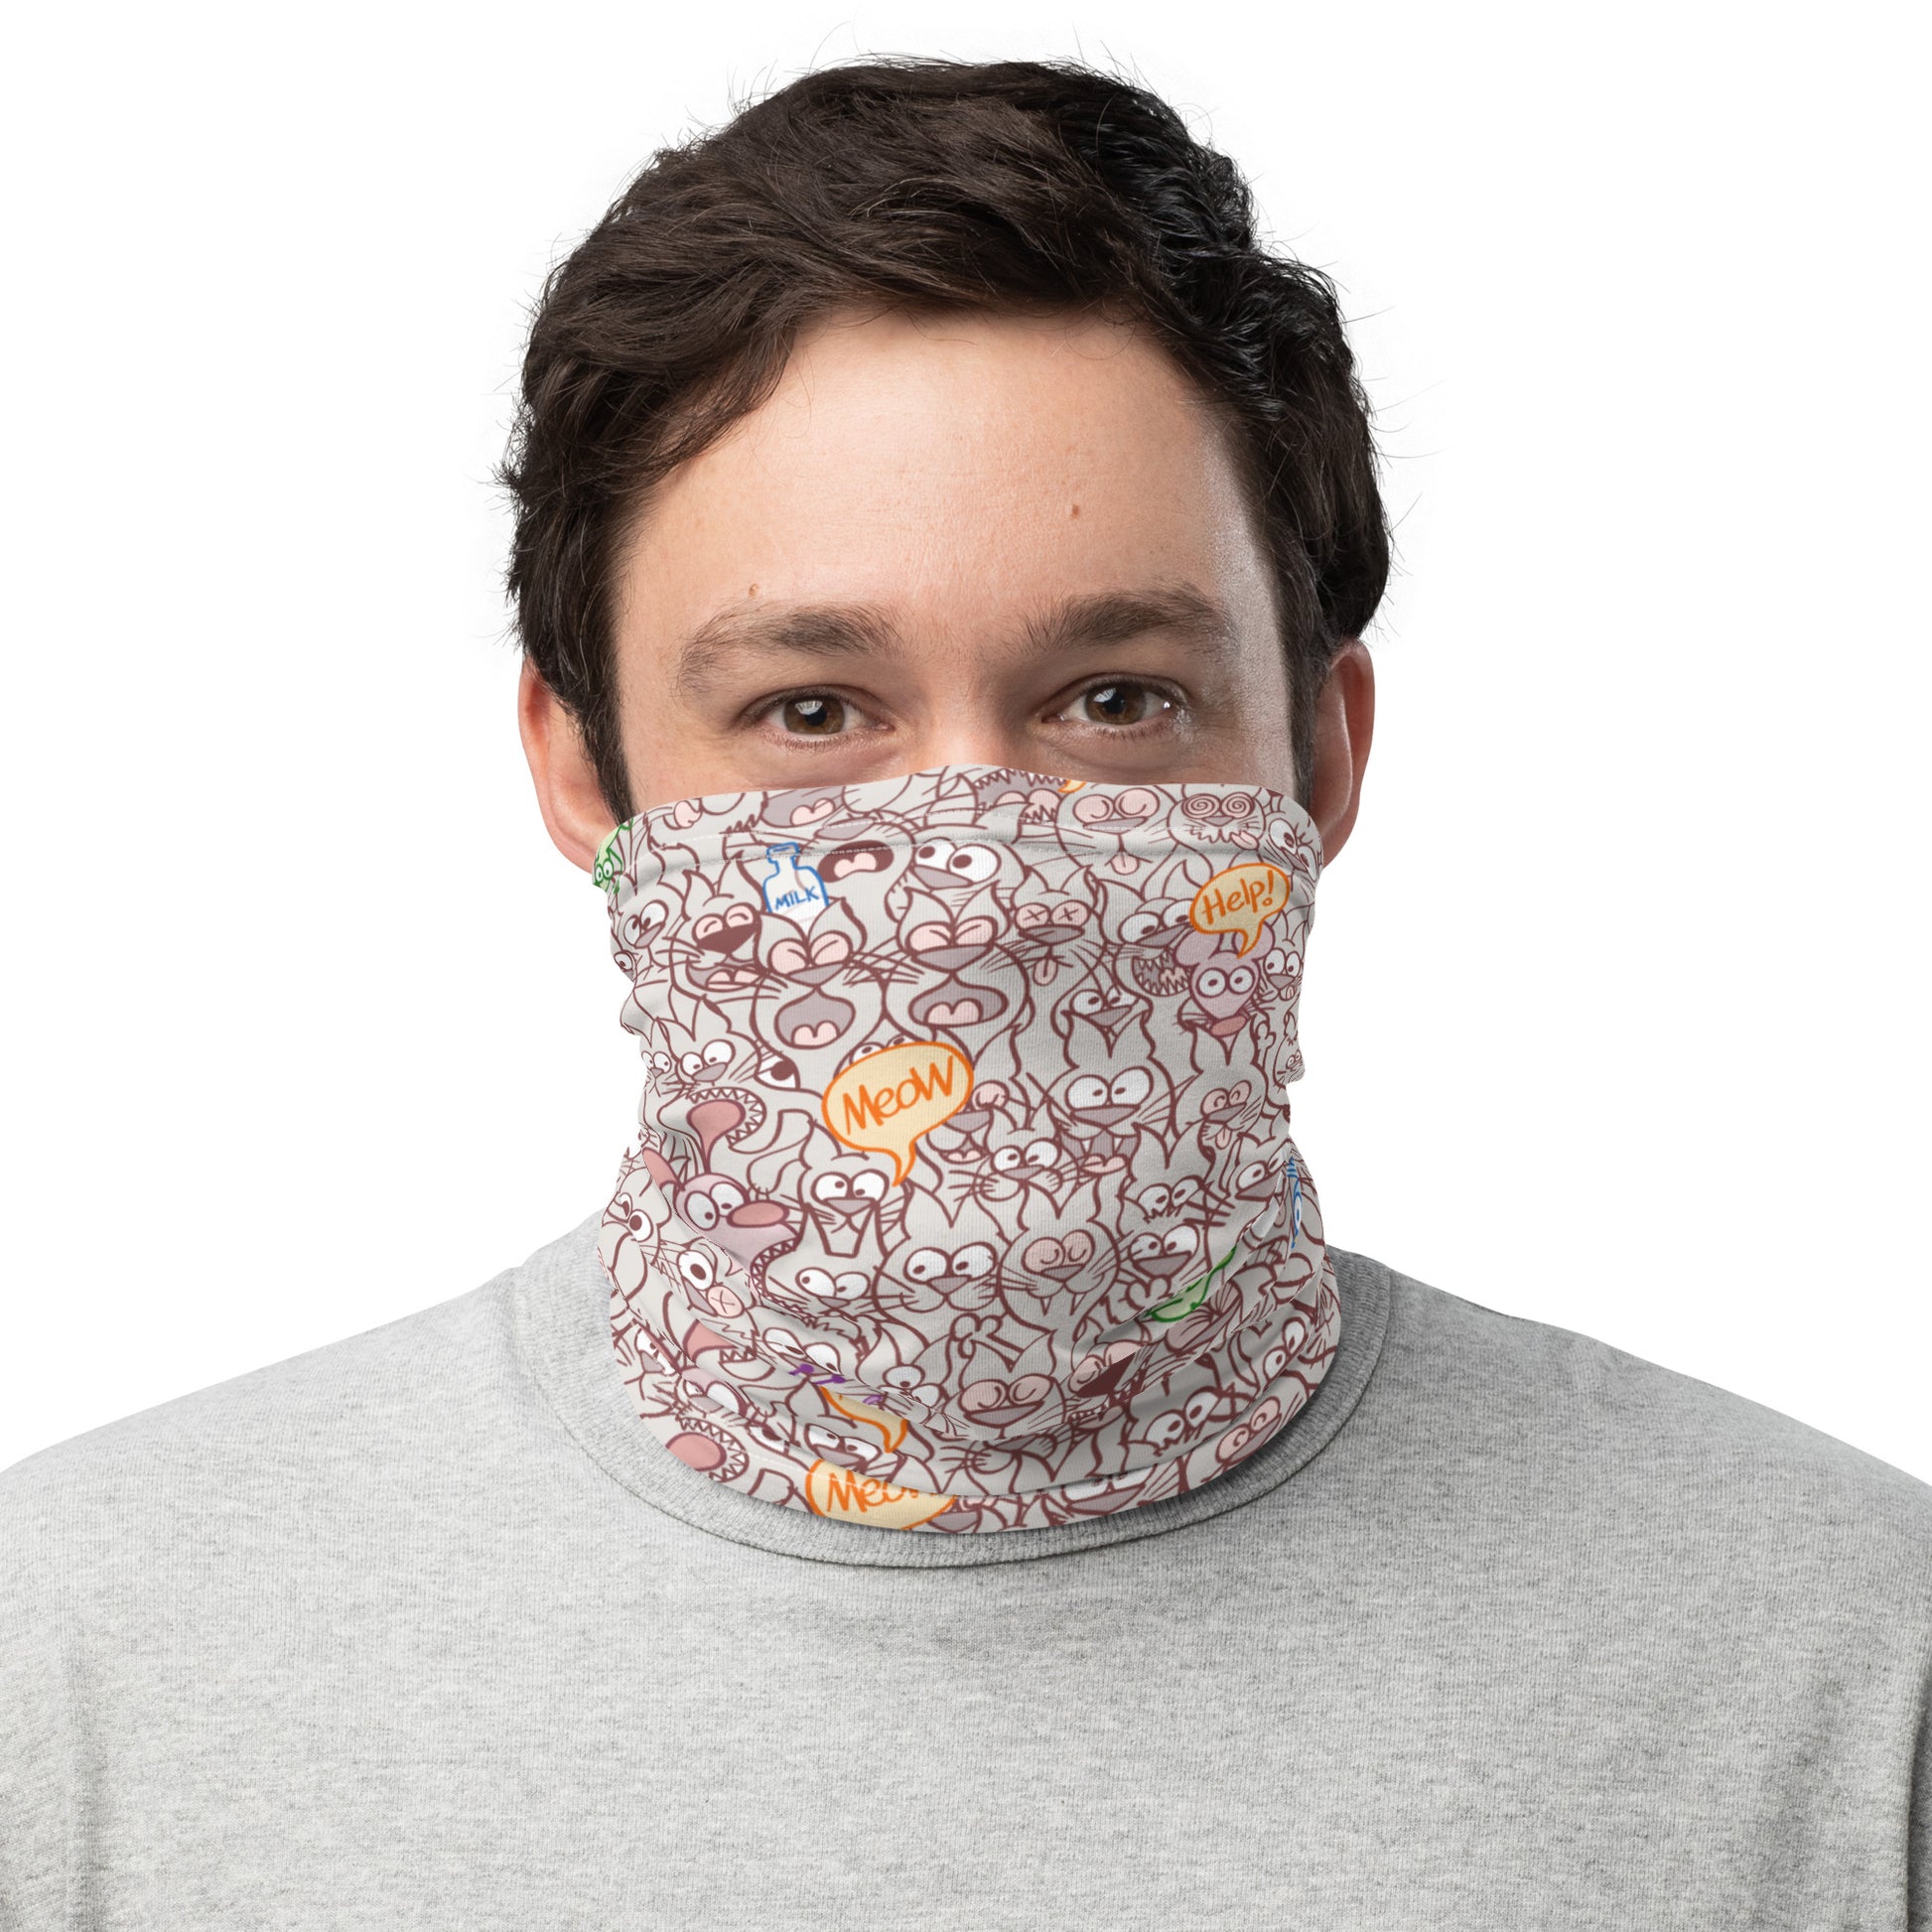 Smiling man wearing Neck Gaiter All-over printed with Exclusive design only for real cat lovers. Mouth cover